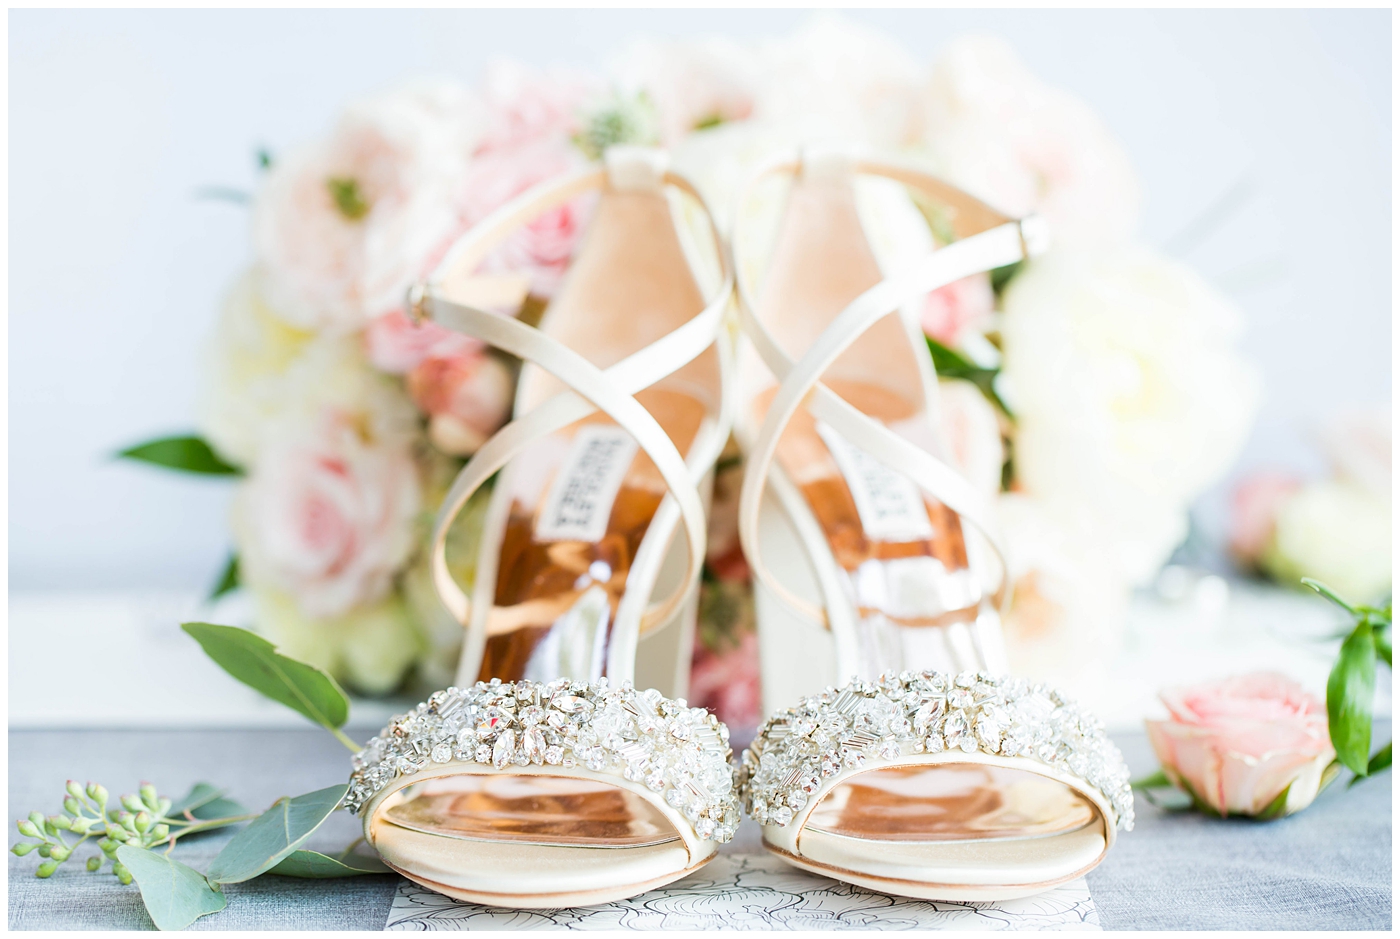 badgley mischka jewel wedding shoes with pink and white floral bouquet